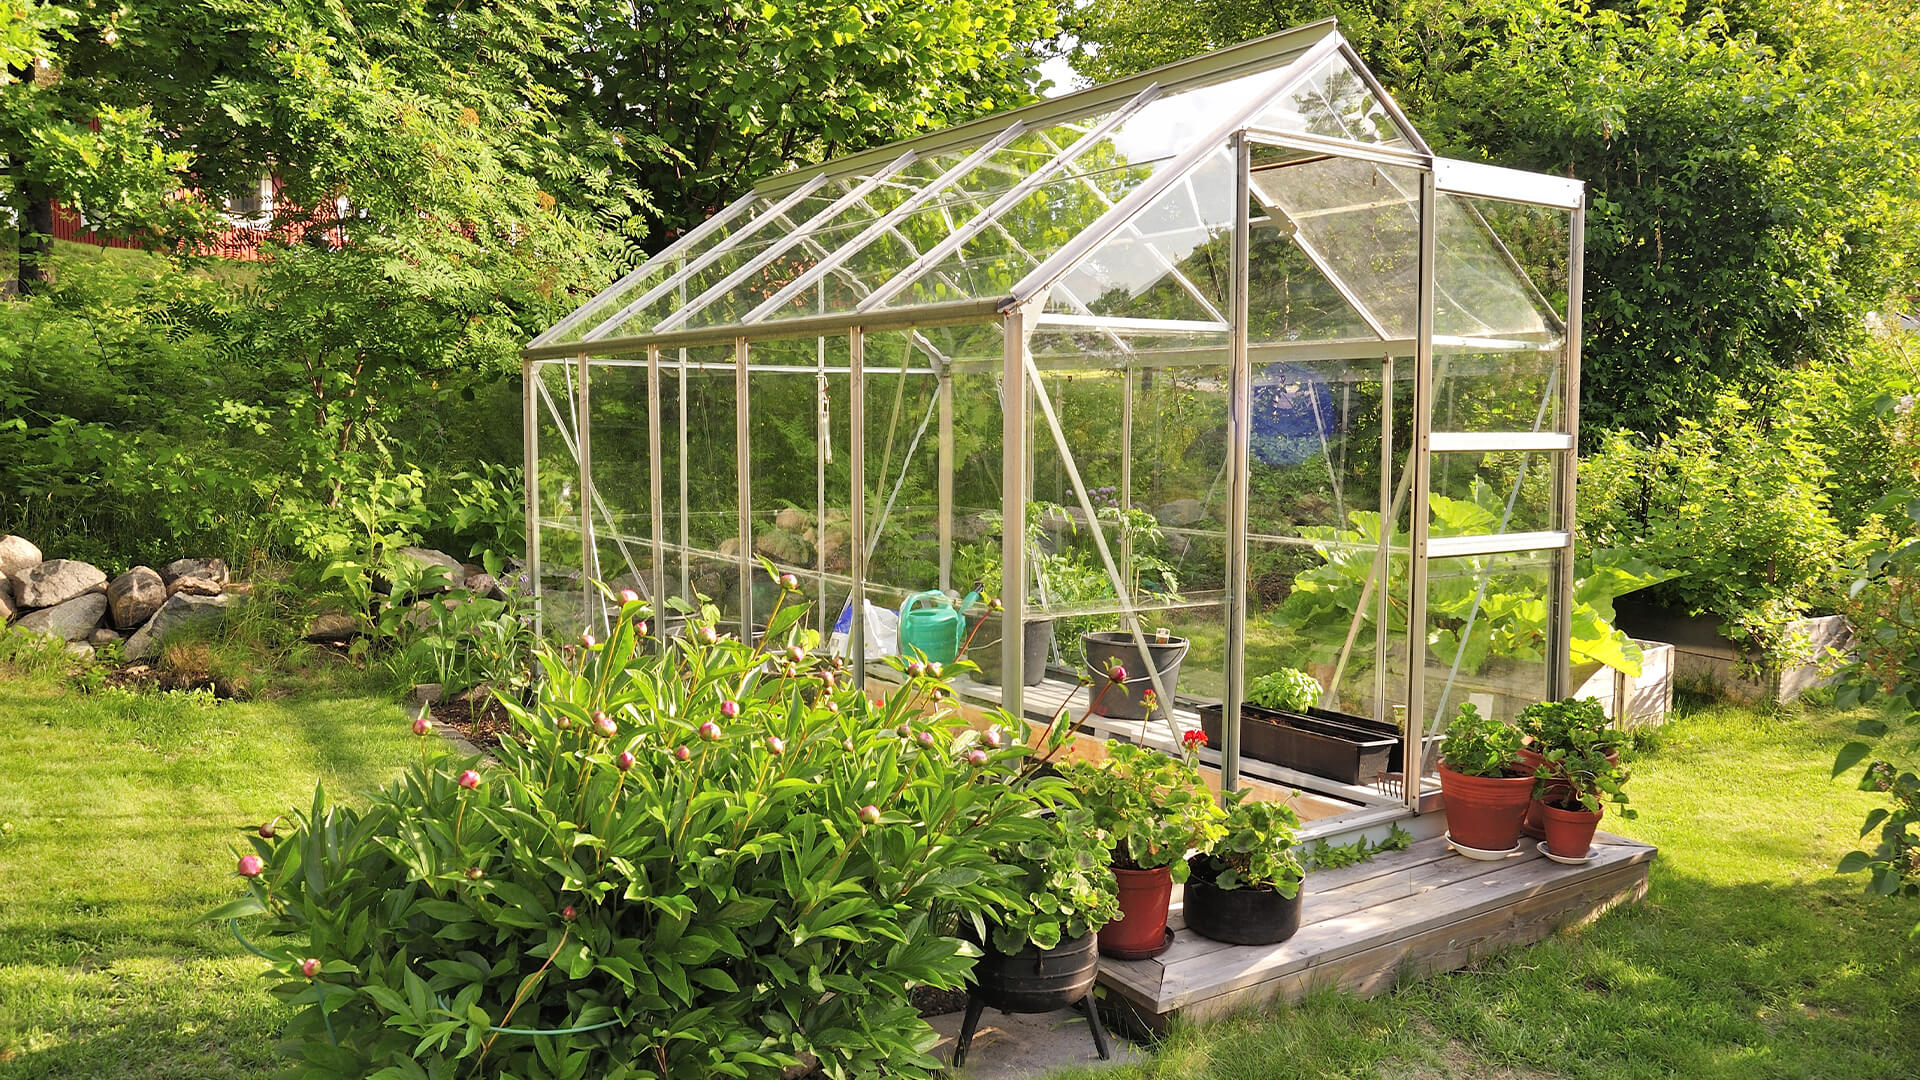 Greenhouses: An Eco Friendly Way to Increase Vegetation